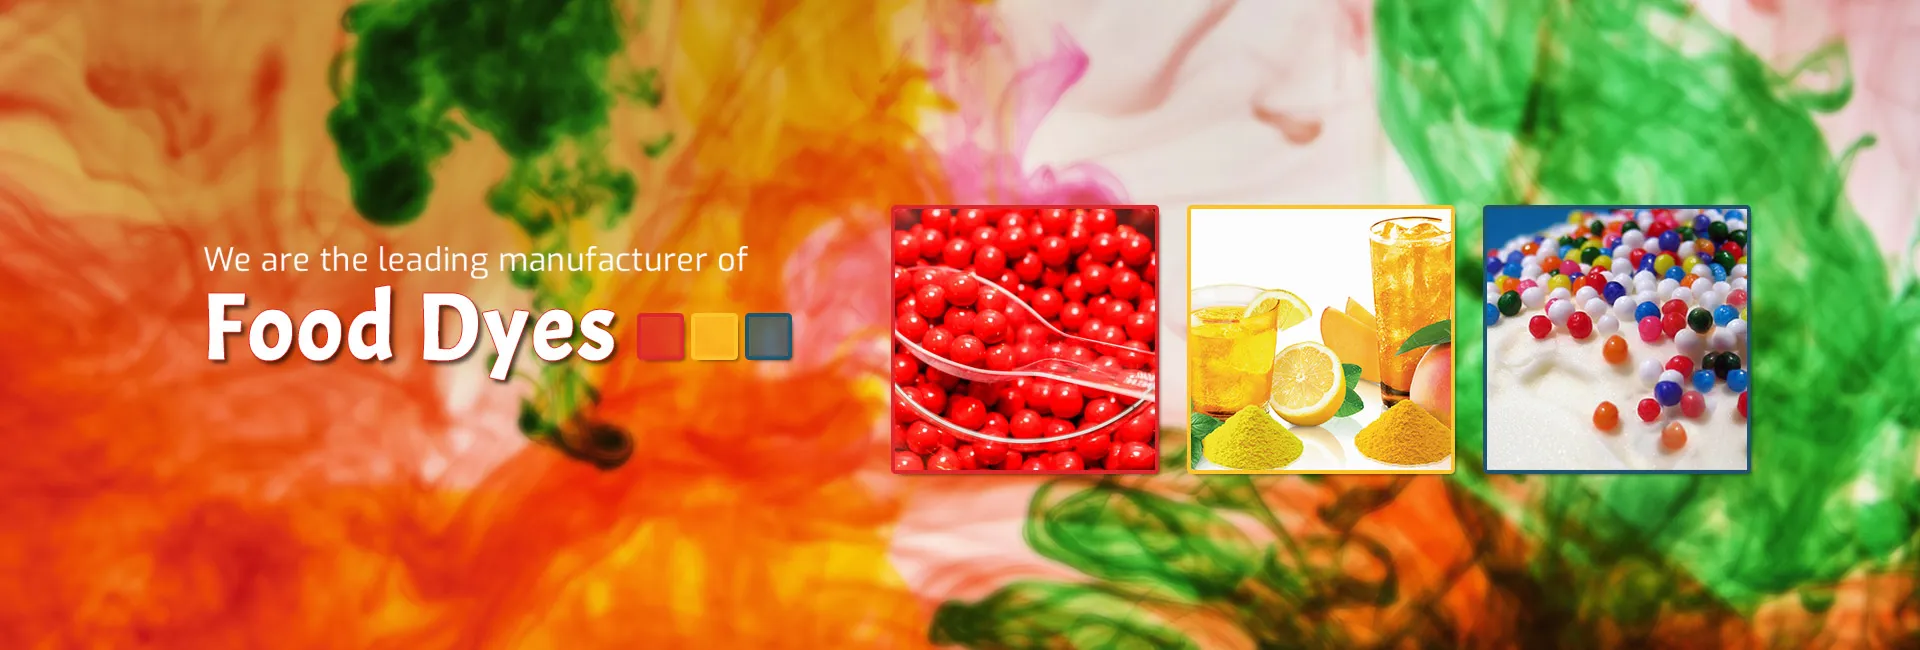 Food Dyes Manufacturer & Suppliers in Dominican Republic